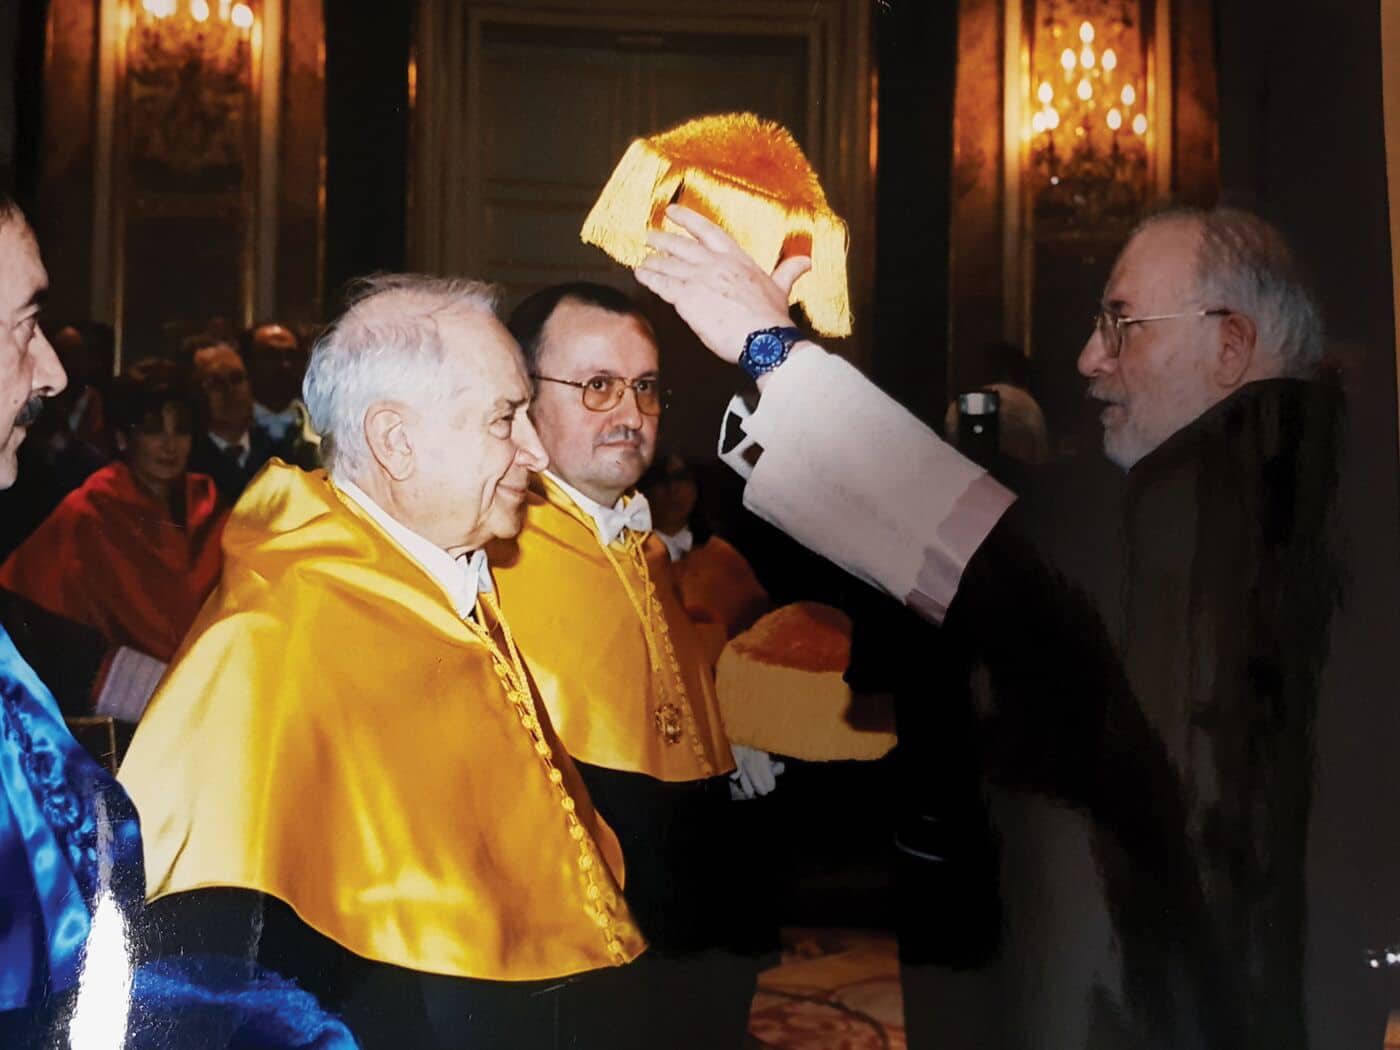 Dr. Raphael Mechoulam receiving honorary doctorate from Compultense University in Madrid in 2006